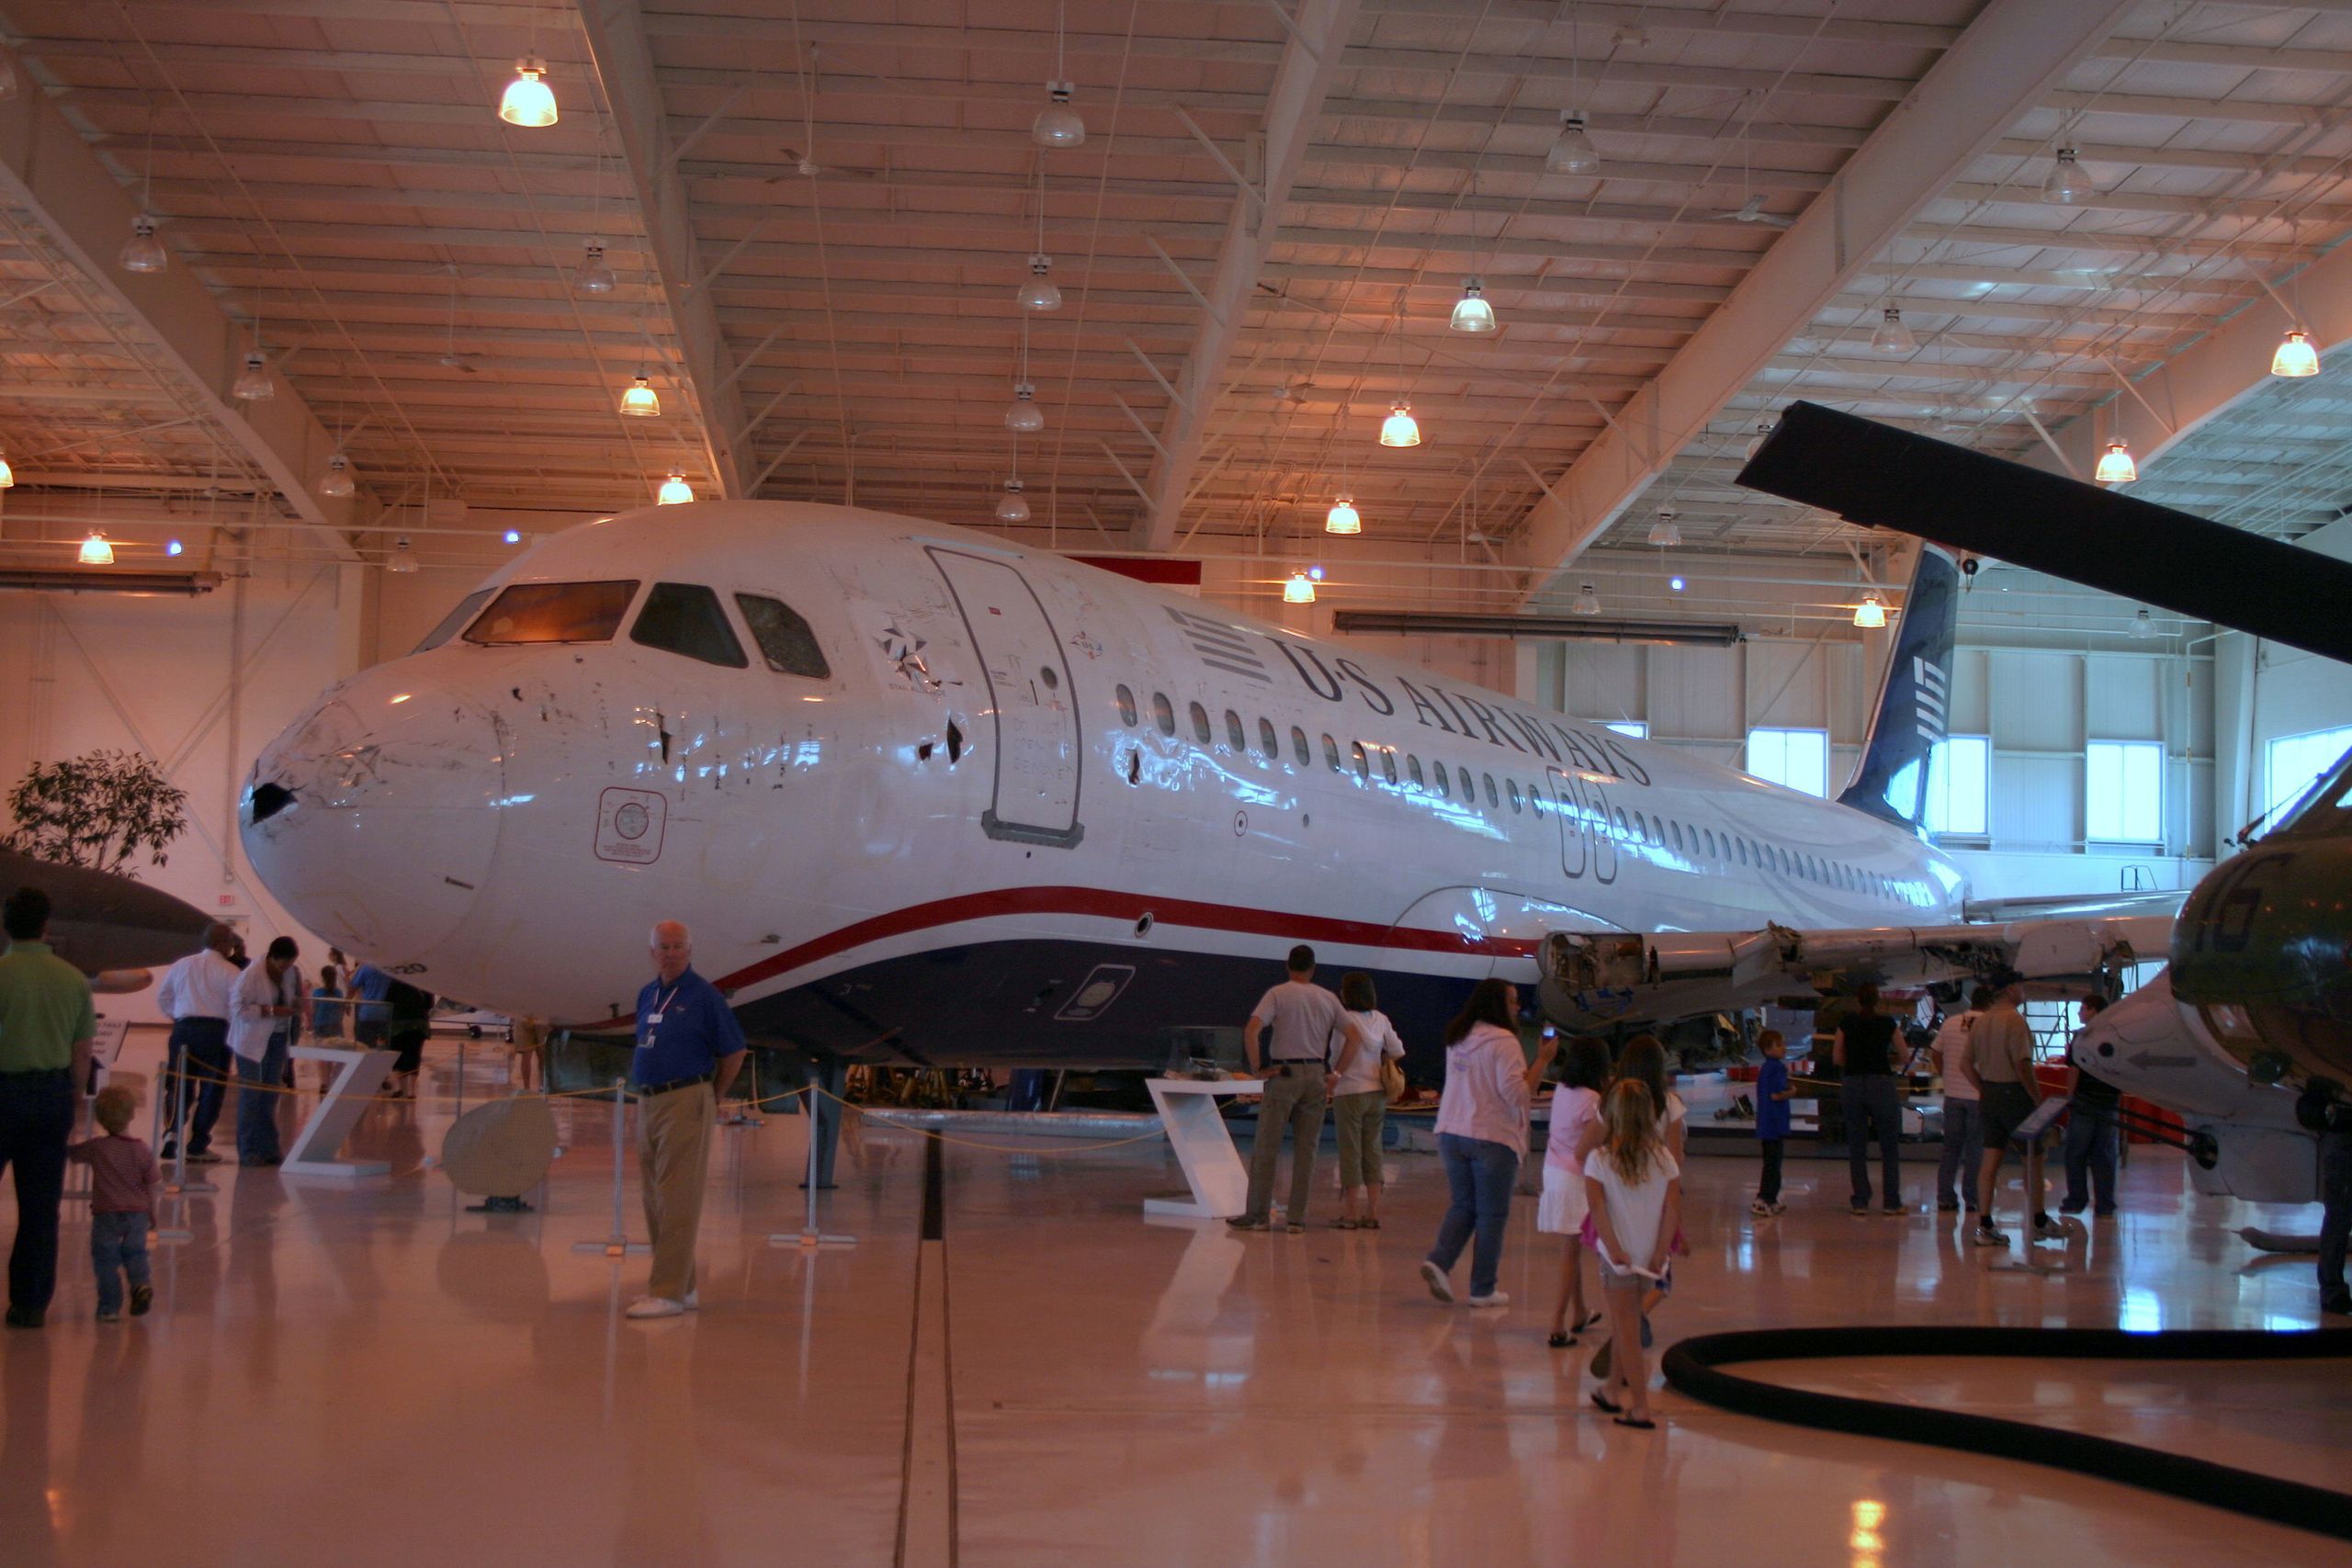 The Airbus A320 involved in the accident at the Hudson in 2009.